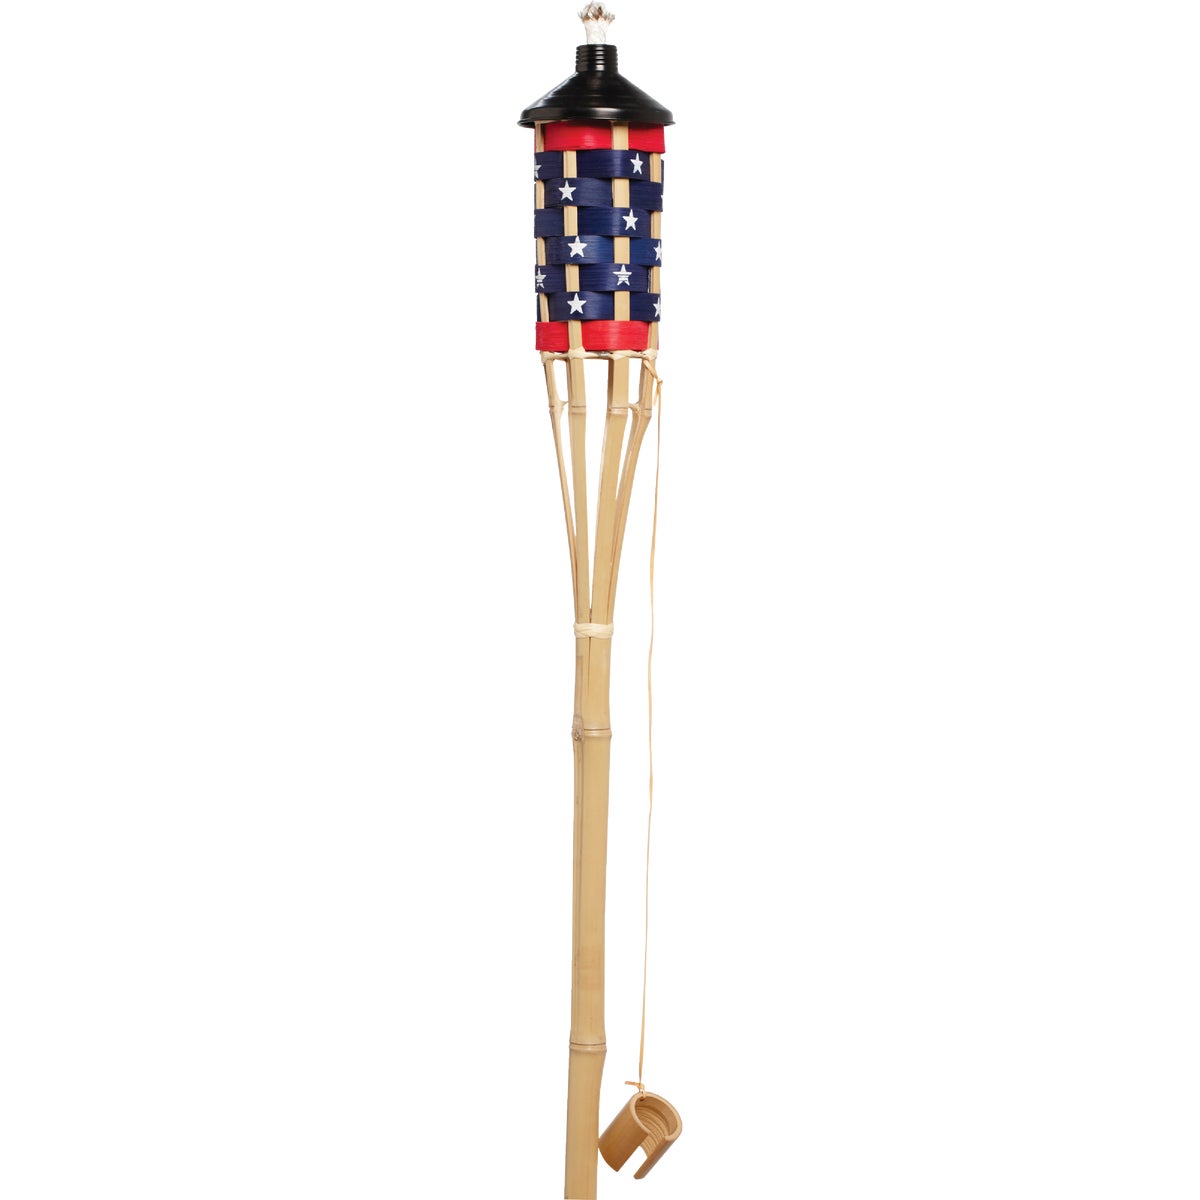 Item 700485, Bamboo patio torch featuring a rattan weaved natural canister basket.